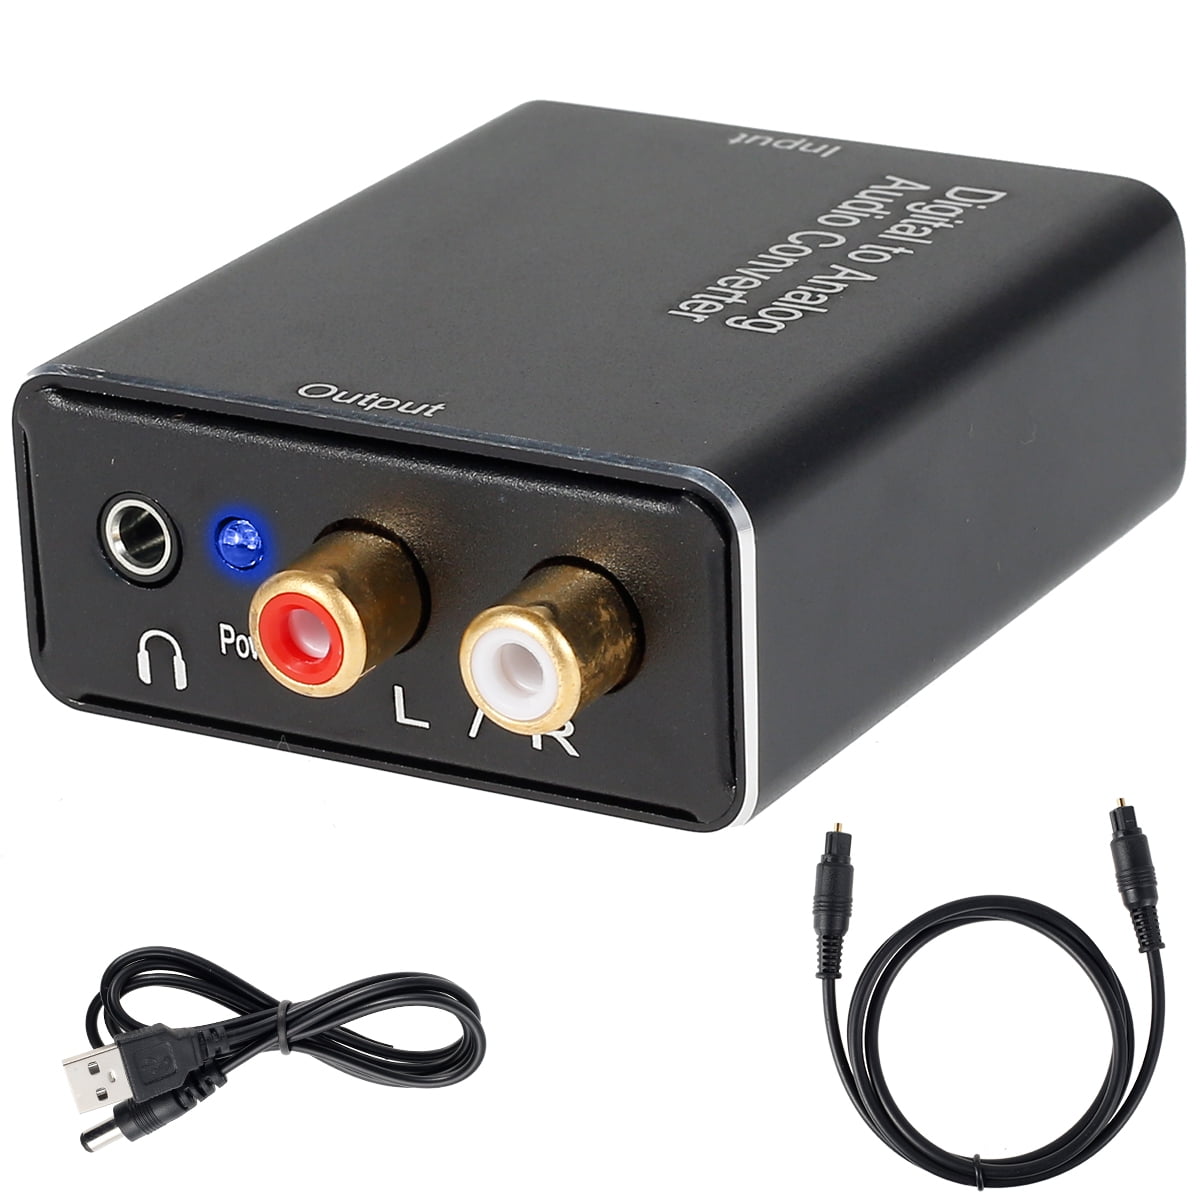 AutoWT Digital Optical Coaxial Toslink Signal to Analog Audio Converter Adapter RCA L/R output with Optical Toslink Cable Standard RCA with 3.5mm Audio Cable Fiber Optical Cable and USB Power Cable 